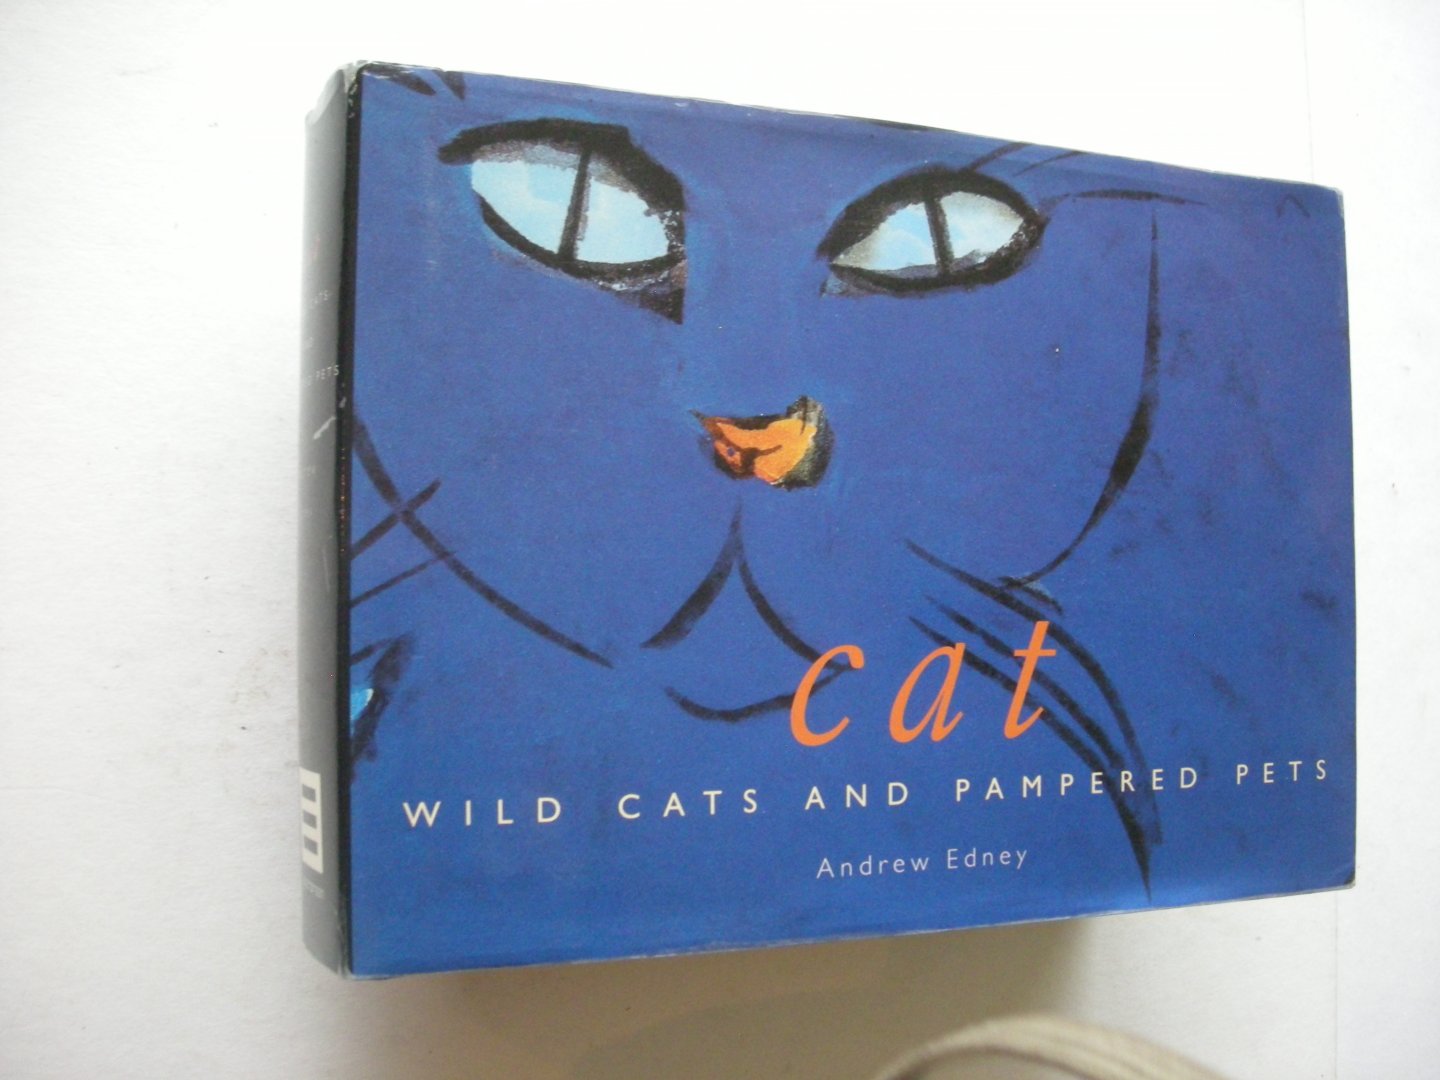 Edney, Andrew - Cat. Wild Cats and Pampered Pets (Cats throughout the ages, about 400 works of art (Da Vinci - Hockney), with literary quotes)